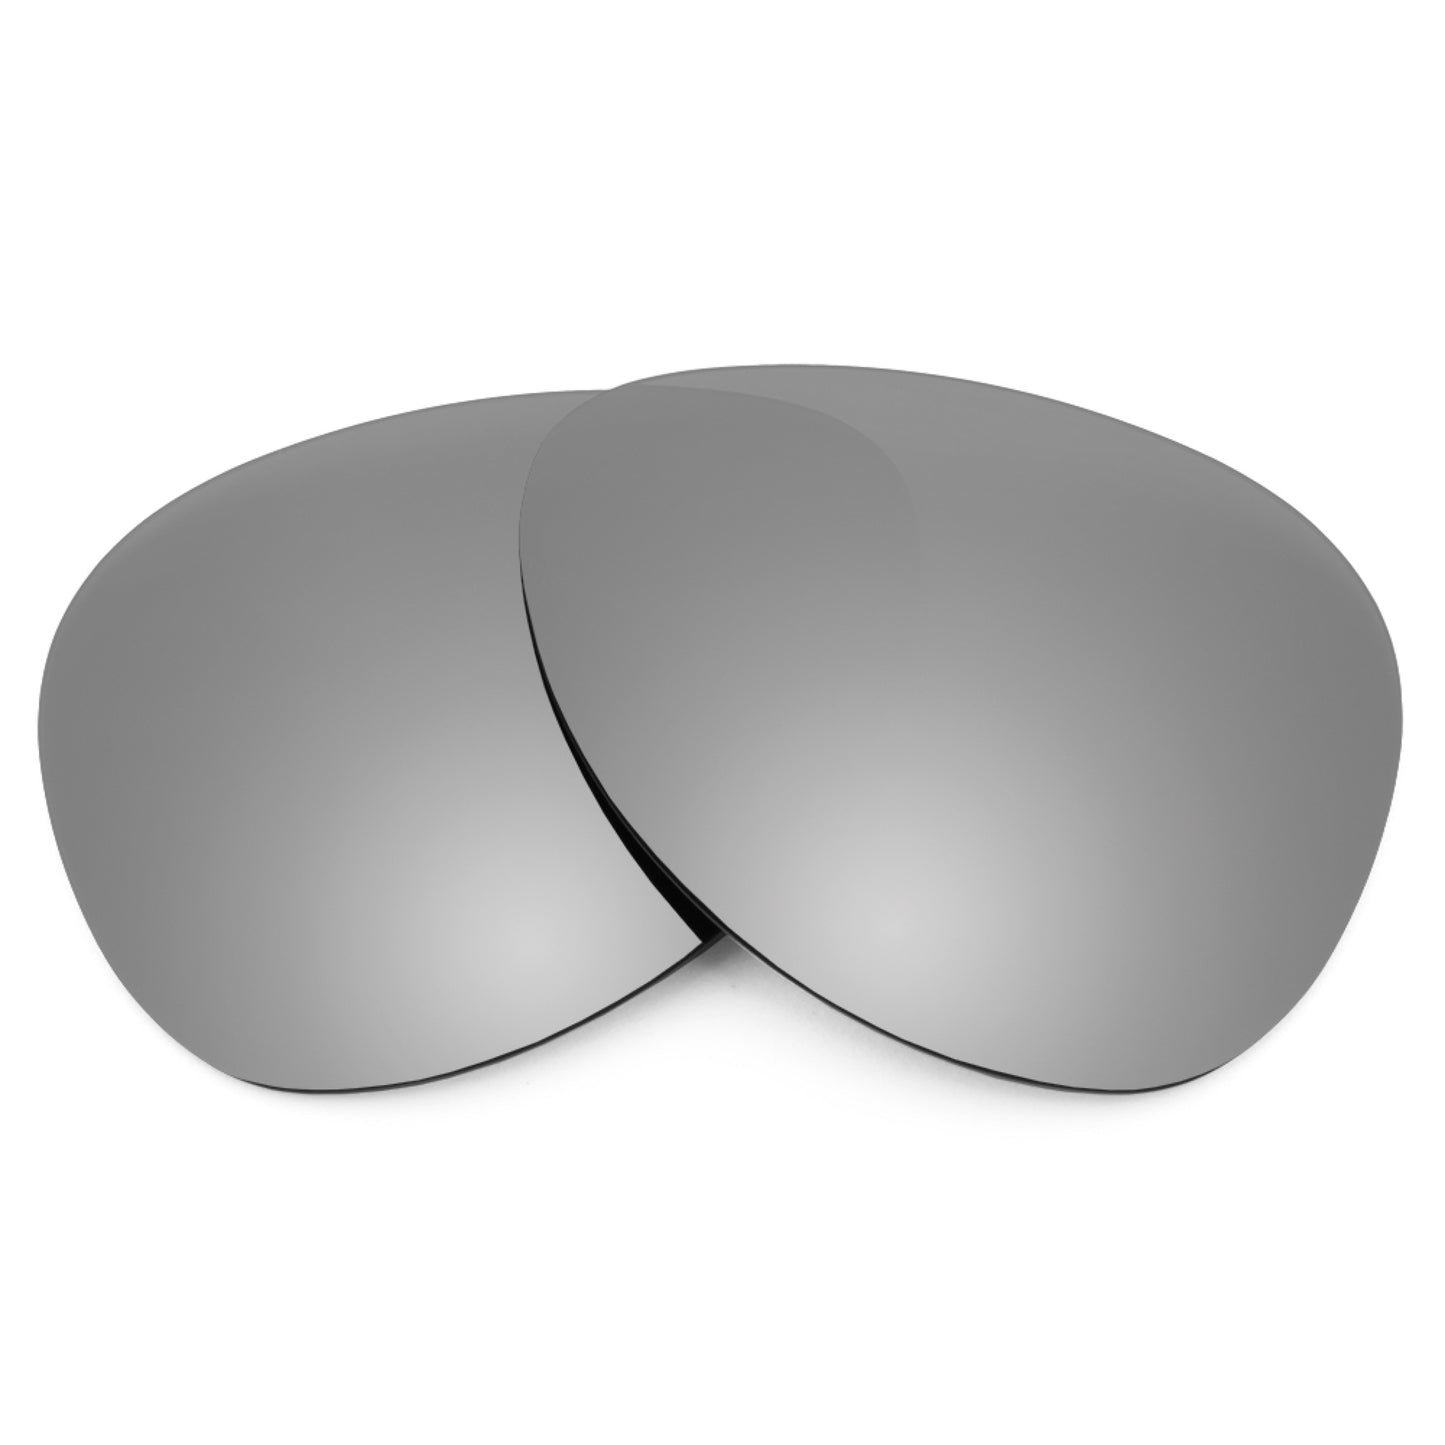 Revant replacement lenses for Ray-Ban New Aviator RB3625 55mm Non-Polarized Titanium